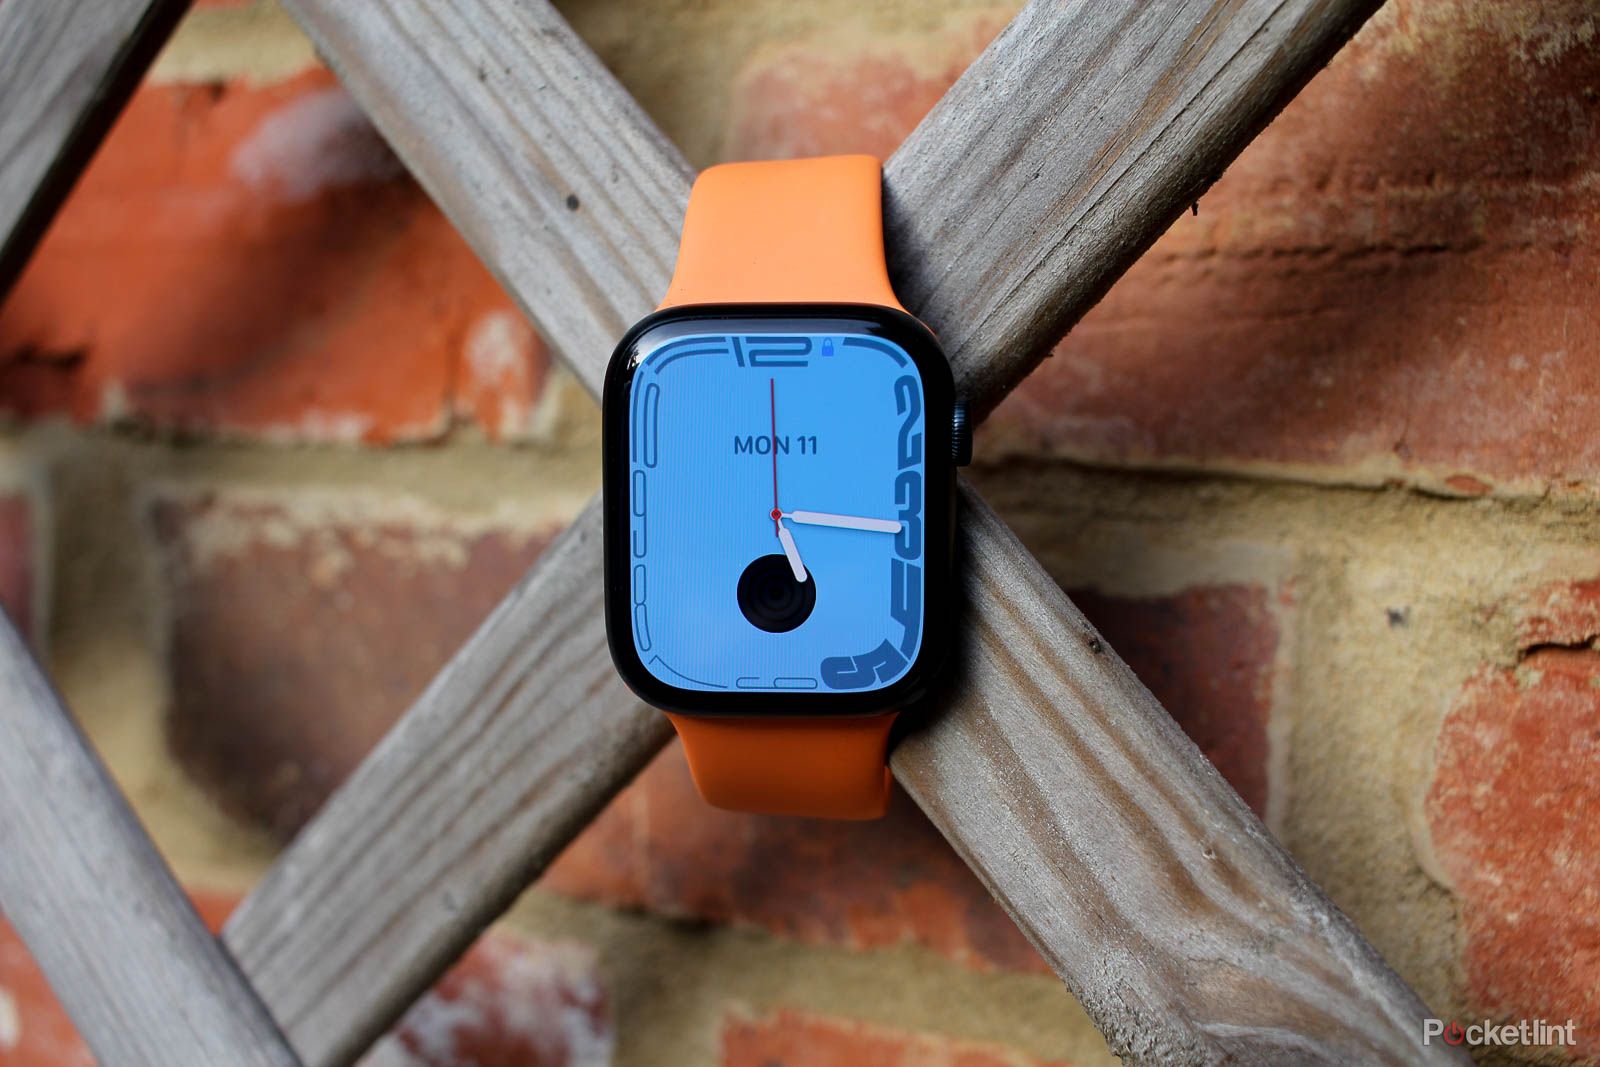 Rune Labs' Apple Watch Parkinson's disease tracking given FDA clearance photo 1